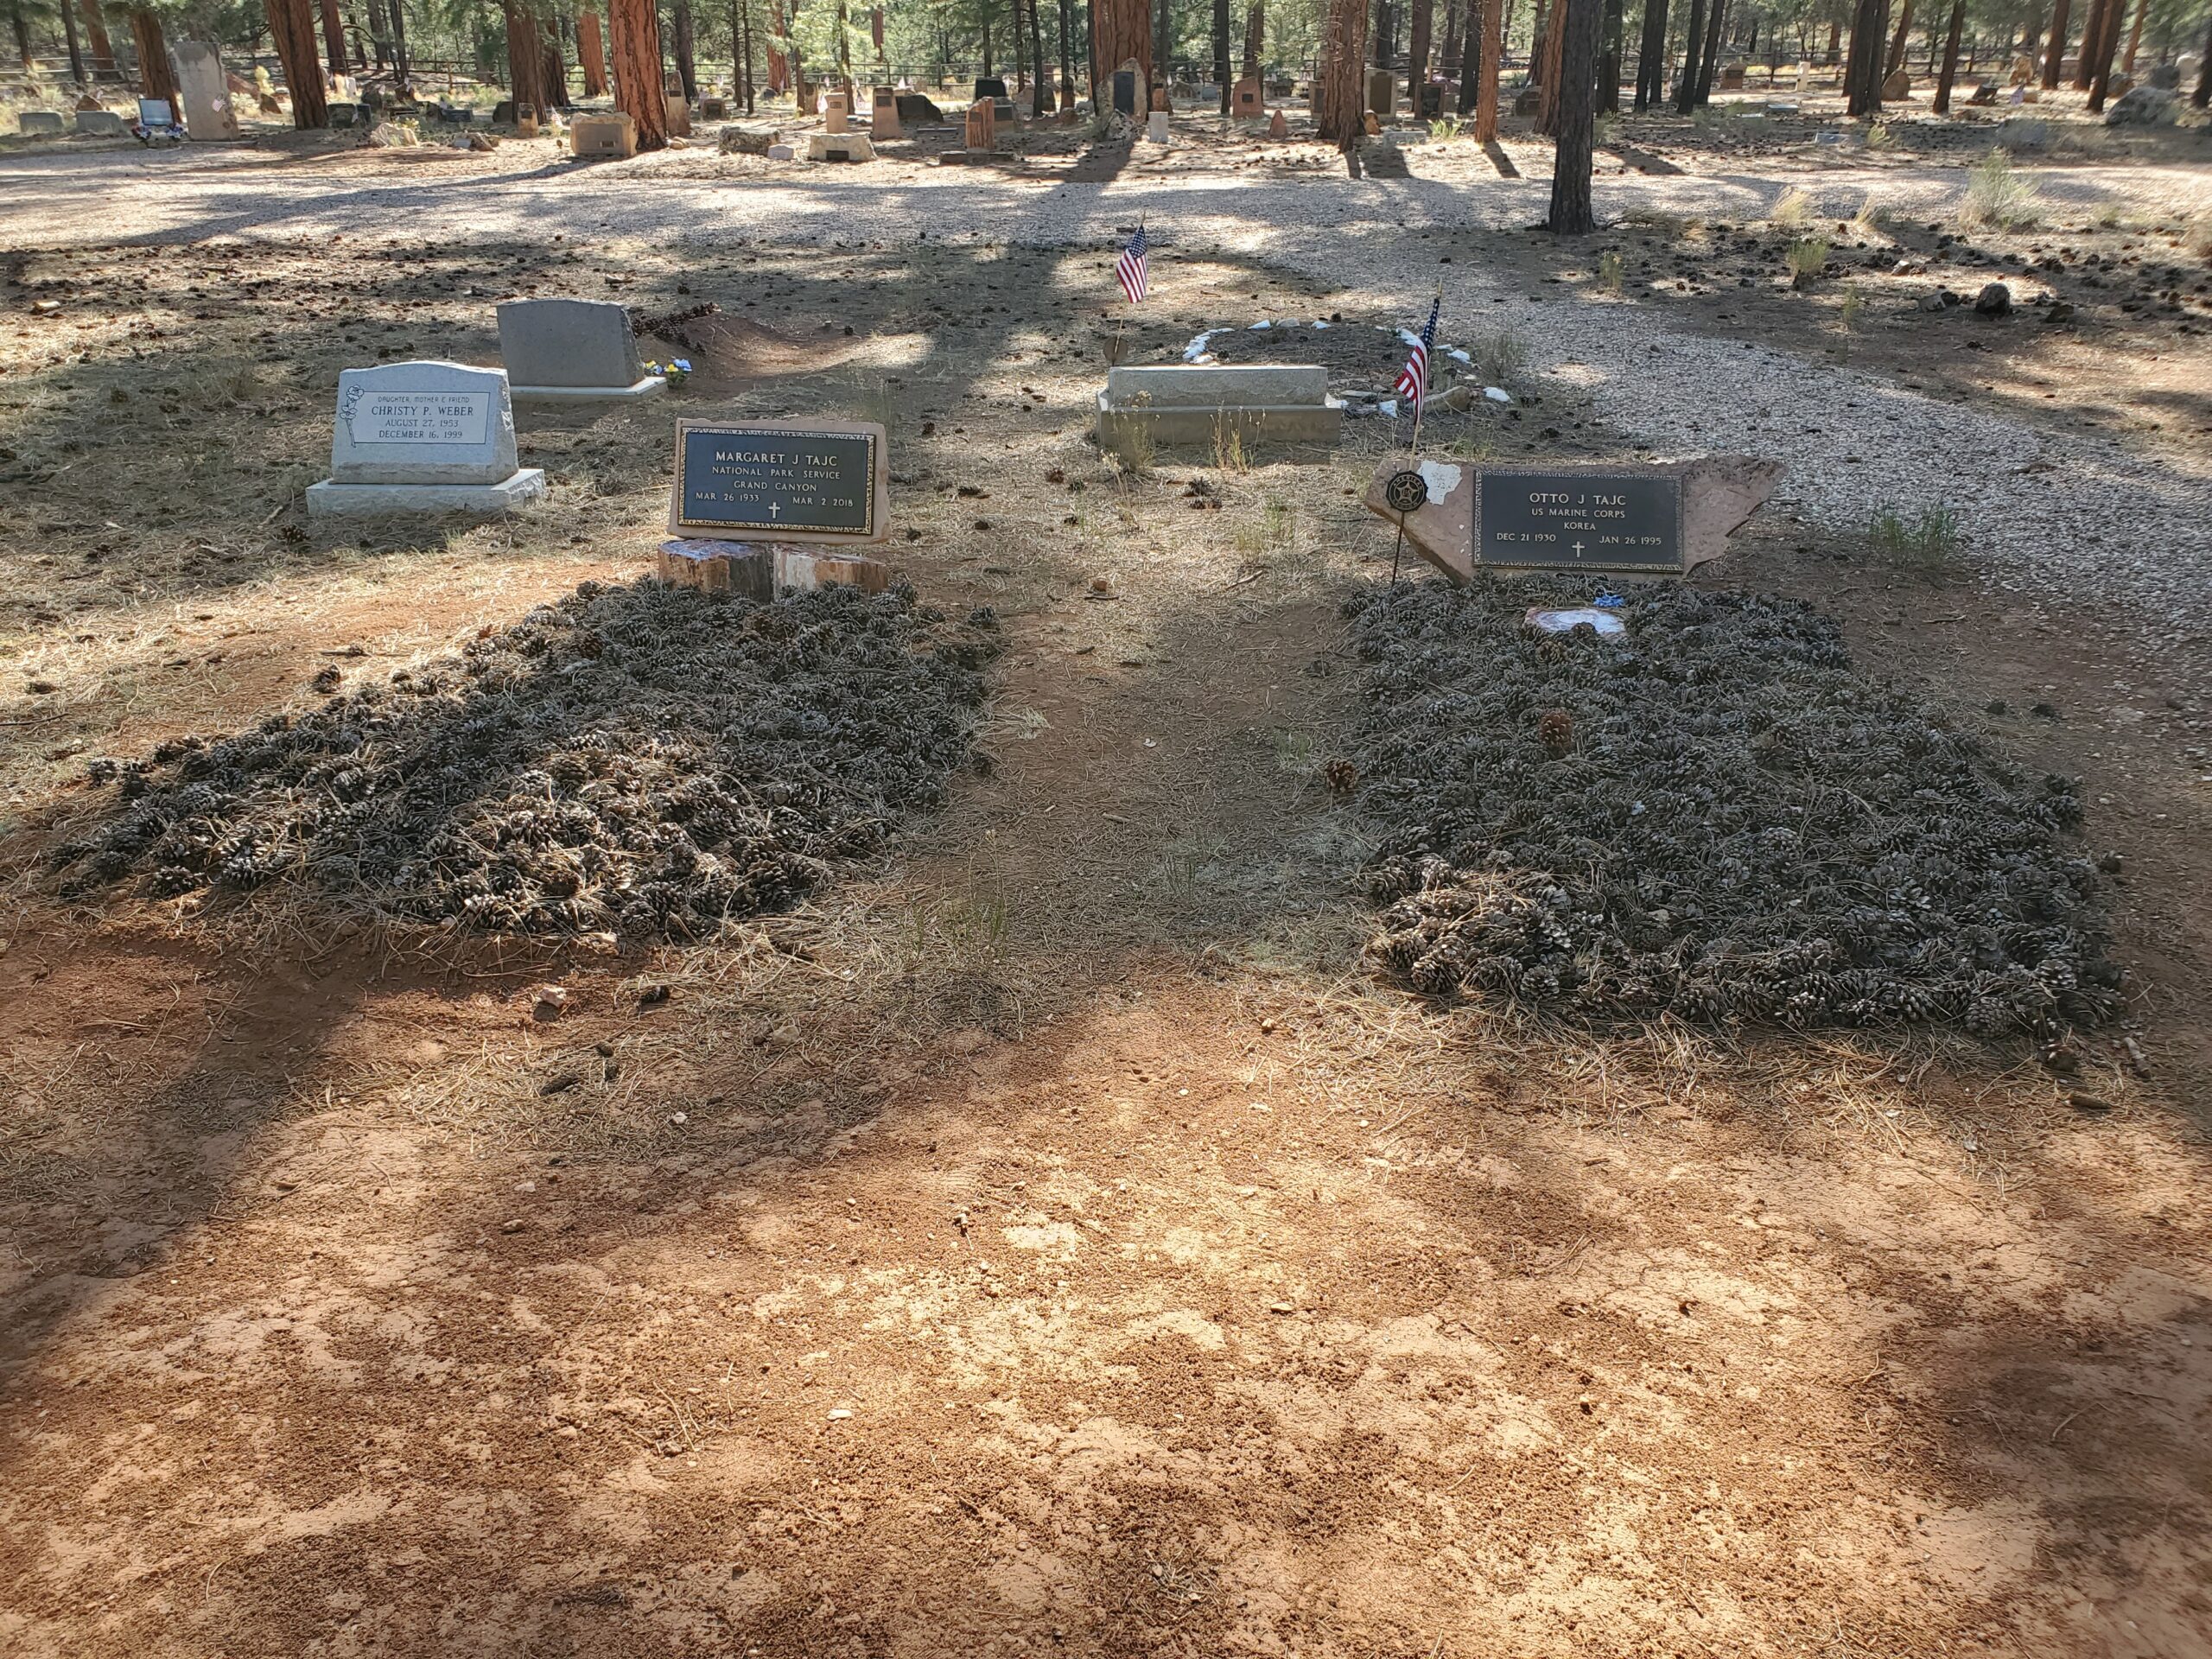 These two graves are littered with a bed of pine cones on each